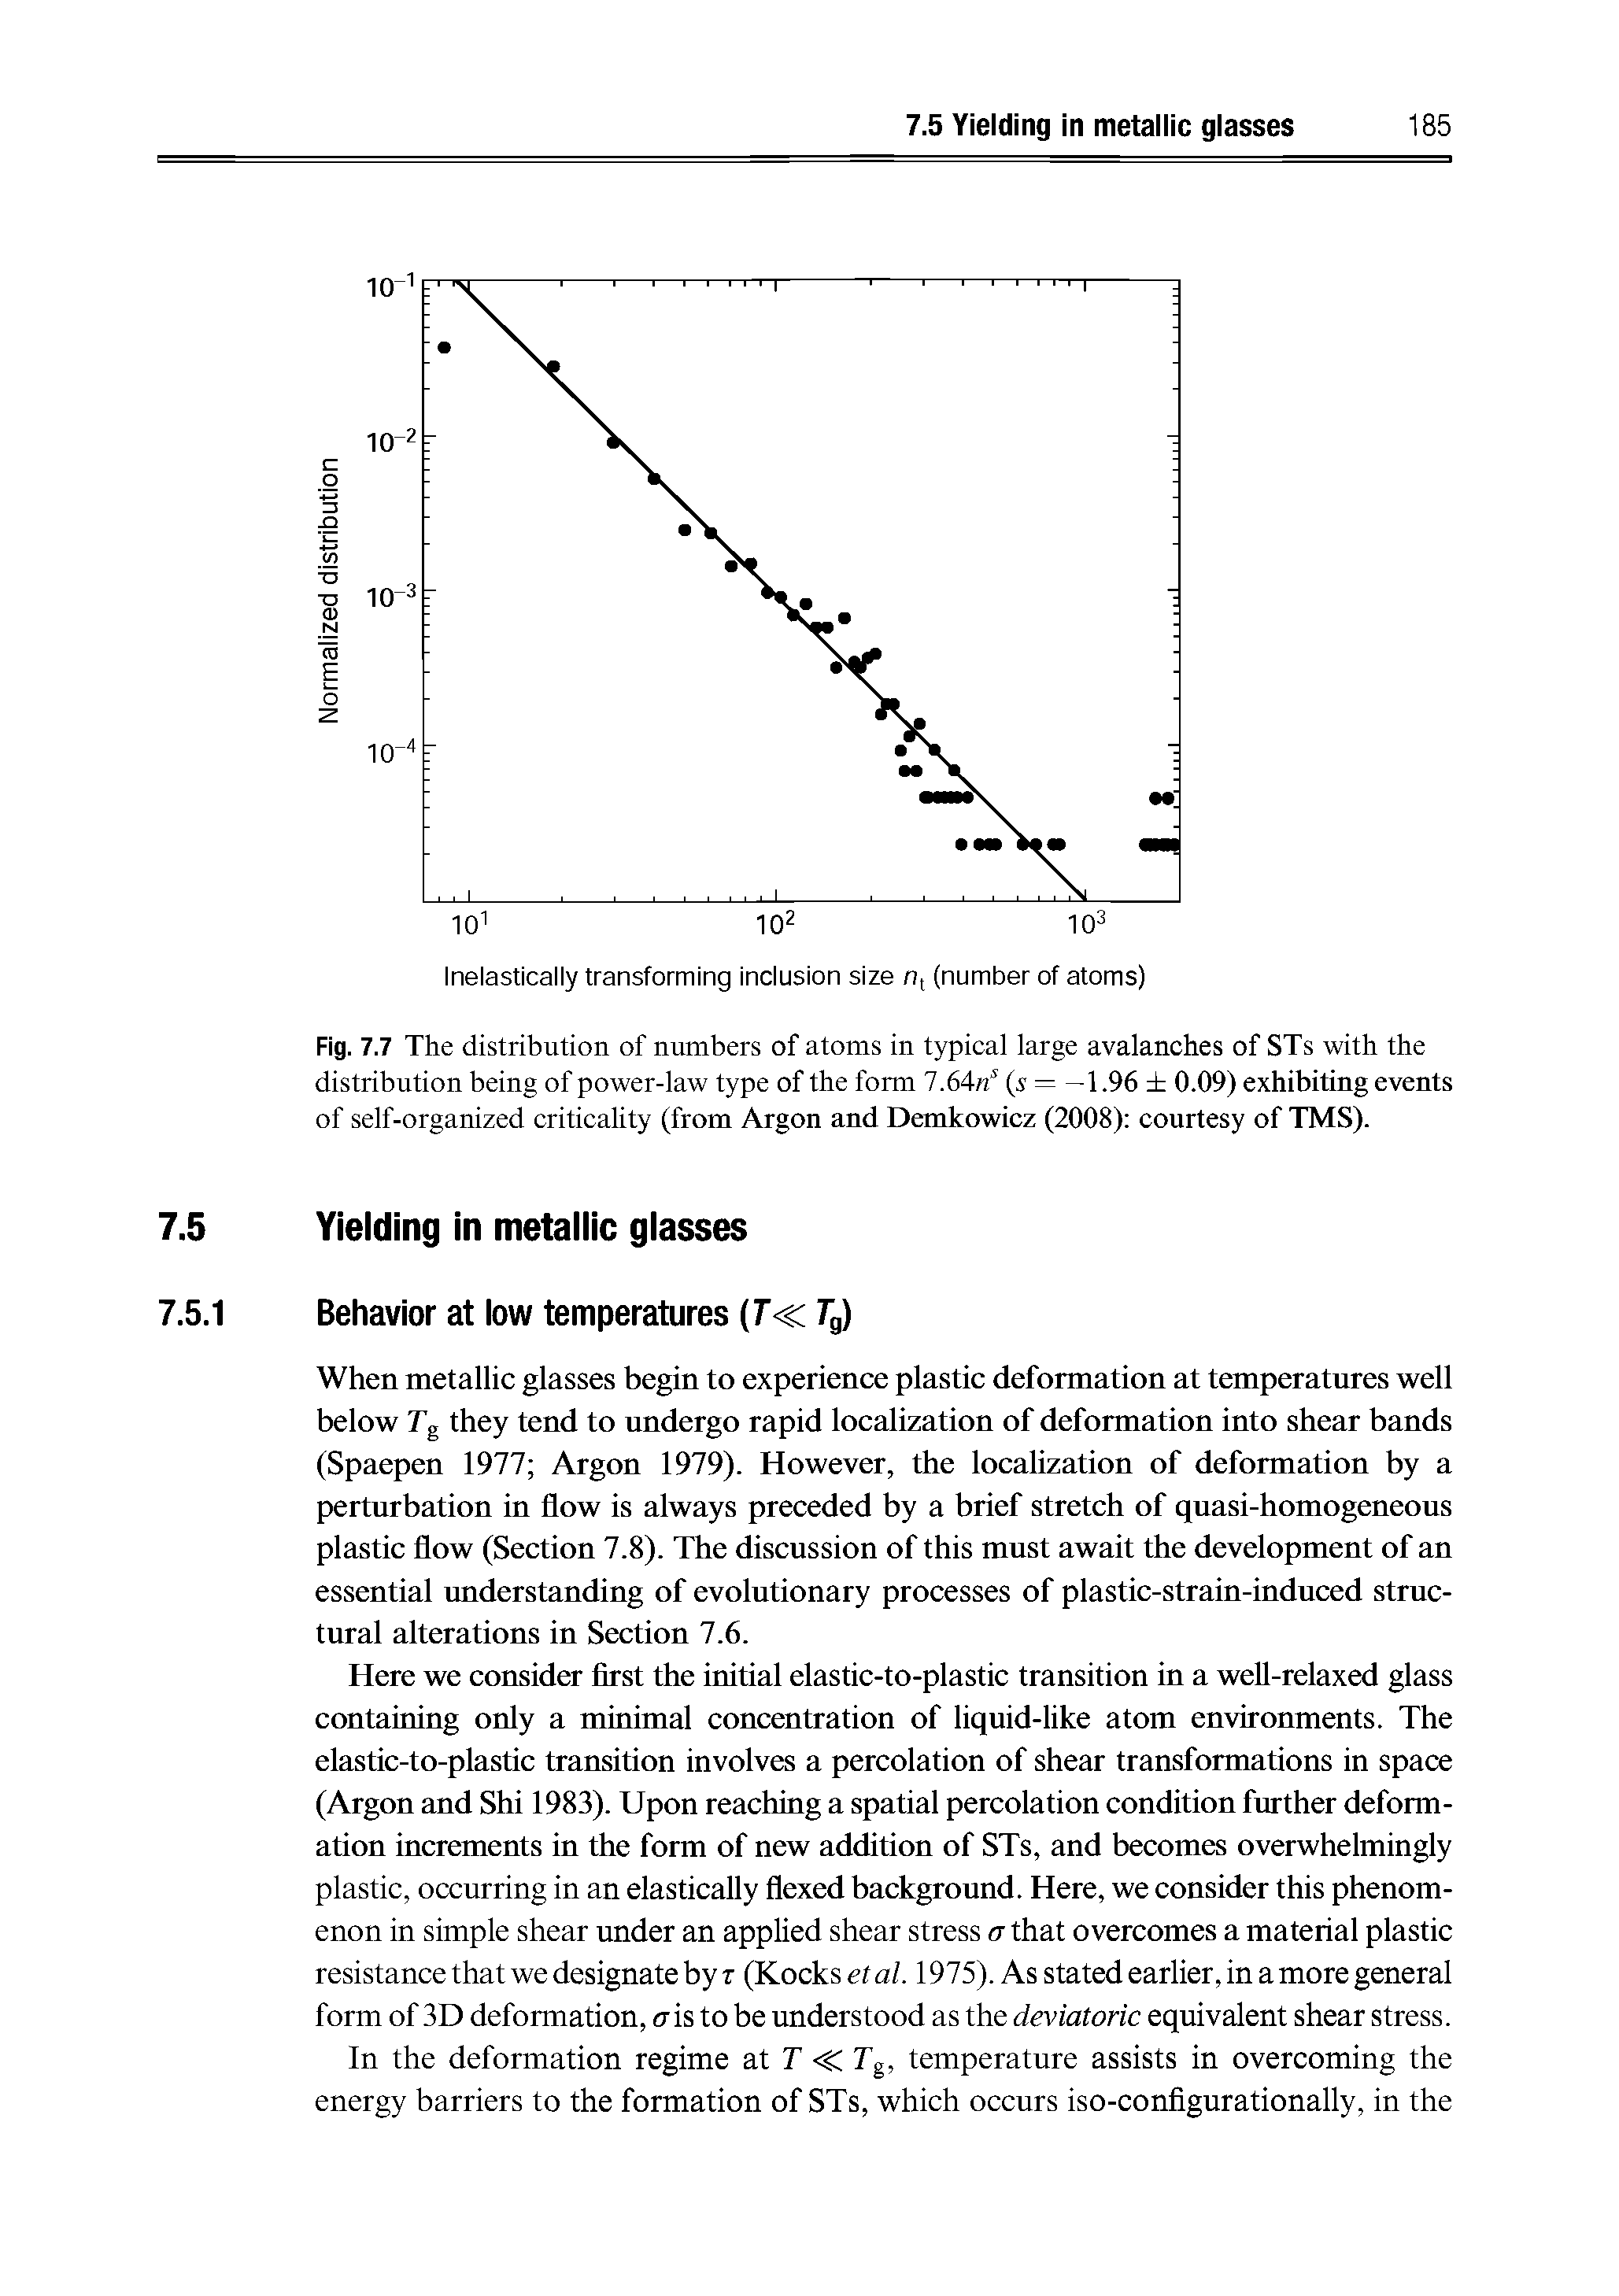 Fig. 7.7 The distribution of numbers of atoms in t rpical large avalanches of STs with the distribution being of power-law type of the form 7.64 (s = —1.96 0.09) exhibiting events of self-organized criticality (from Argon and Demkowicz (2008) courtesy of TMS).